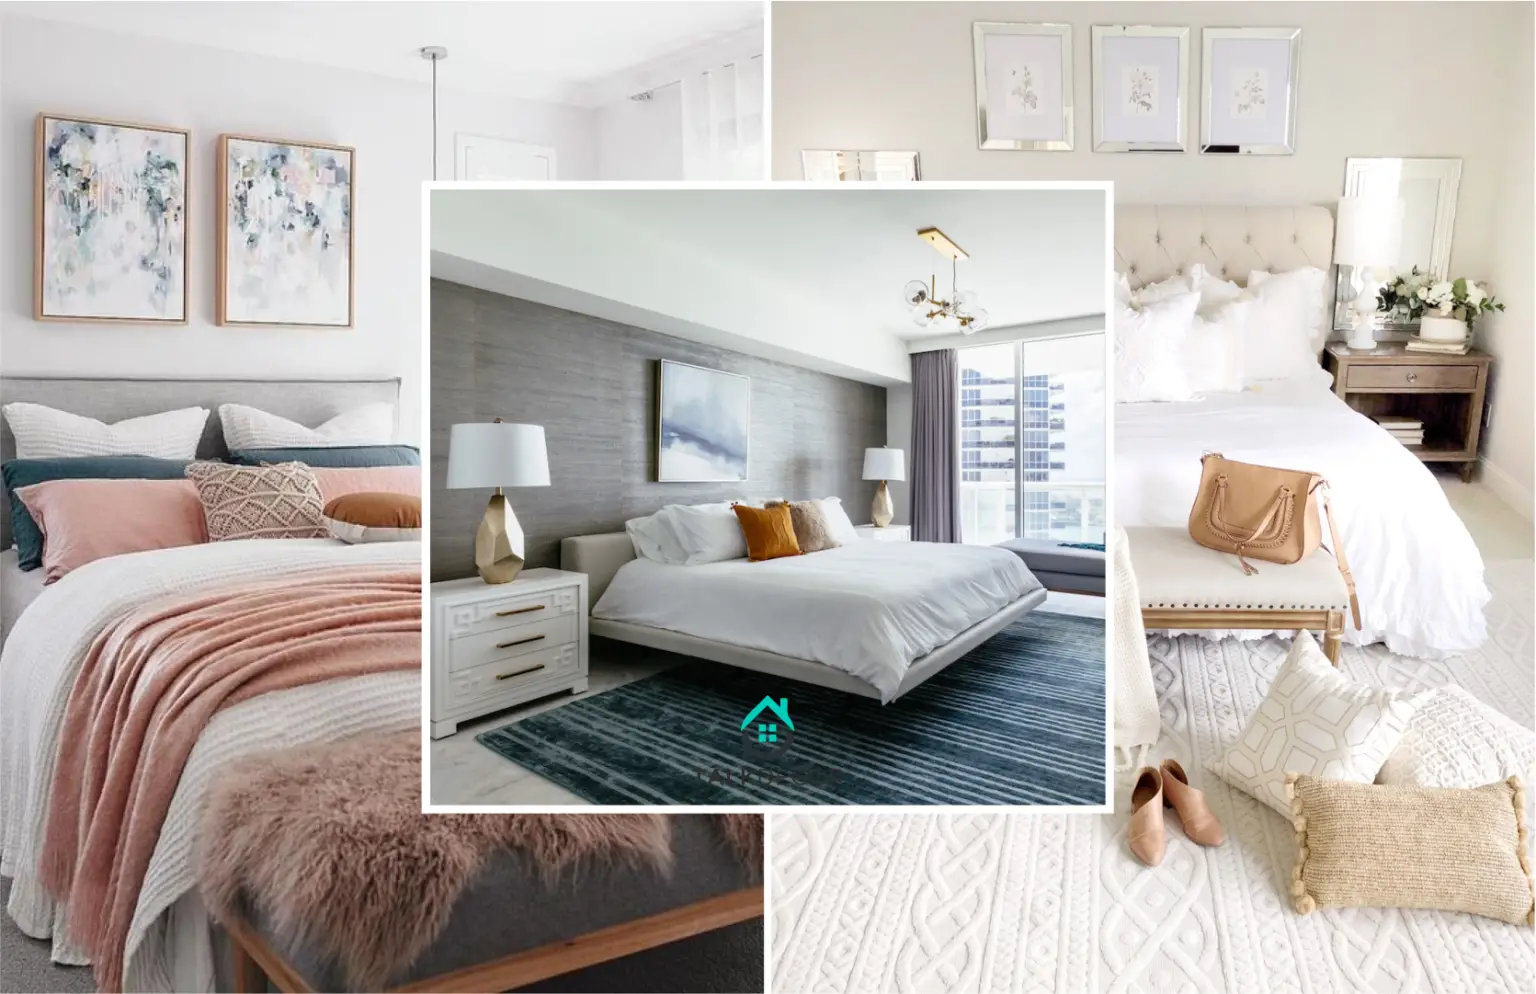 20 Ways to Create a Warm Bedroom That Are Actually Warm - Talkdecor